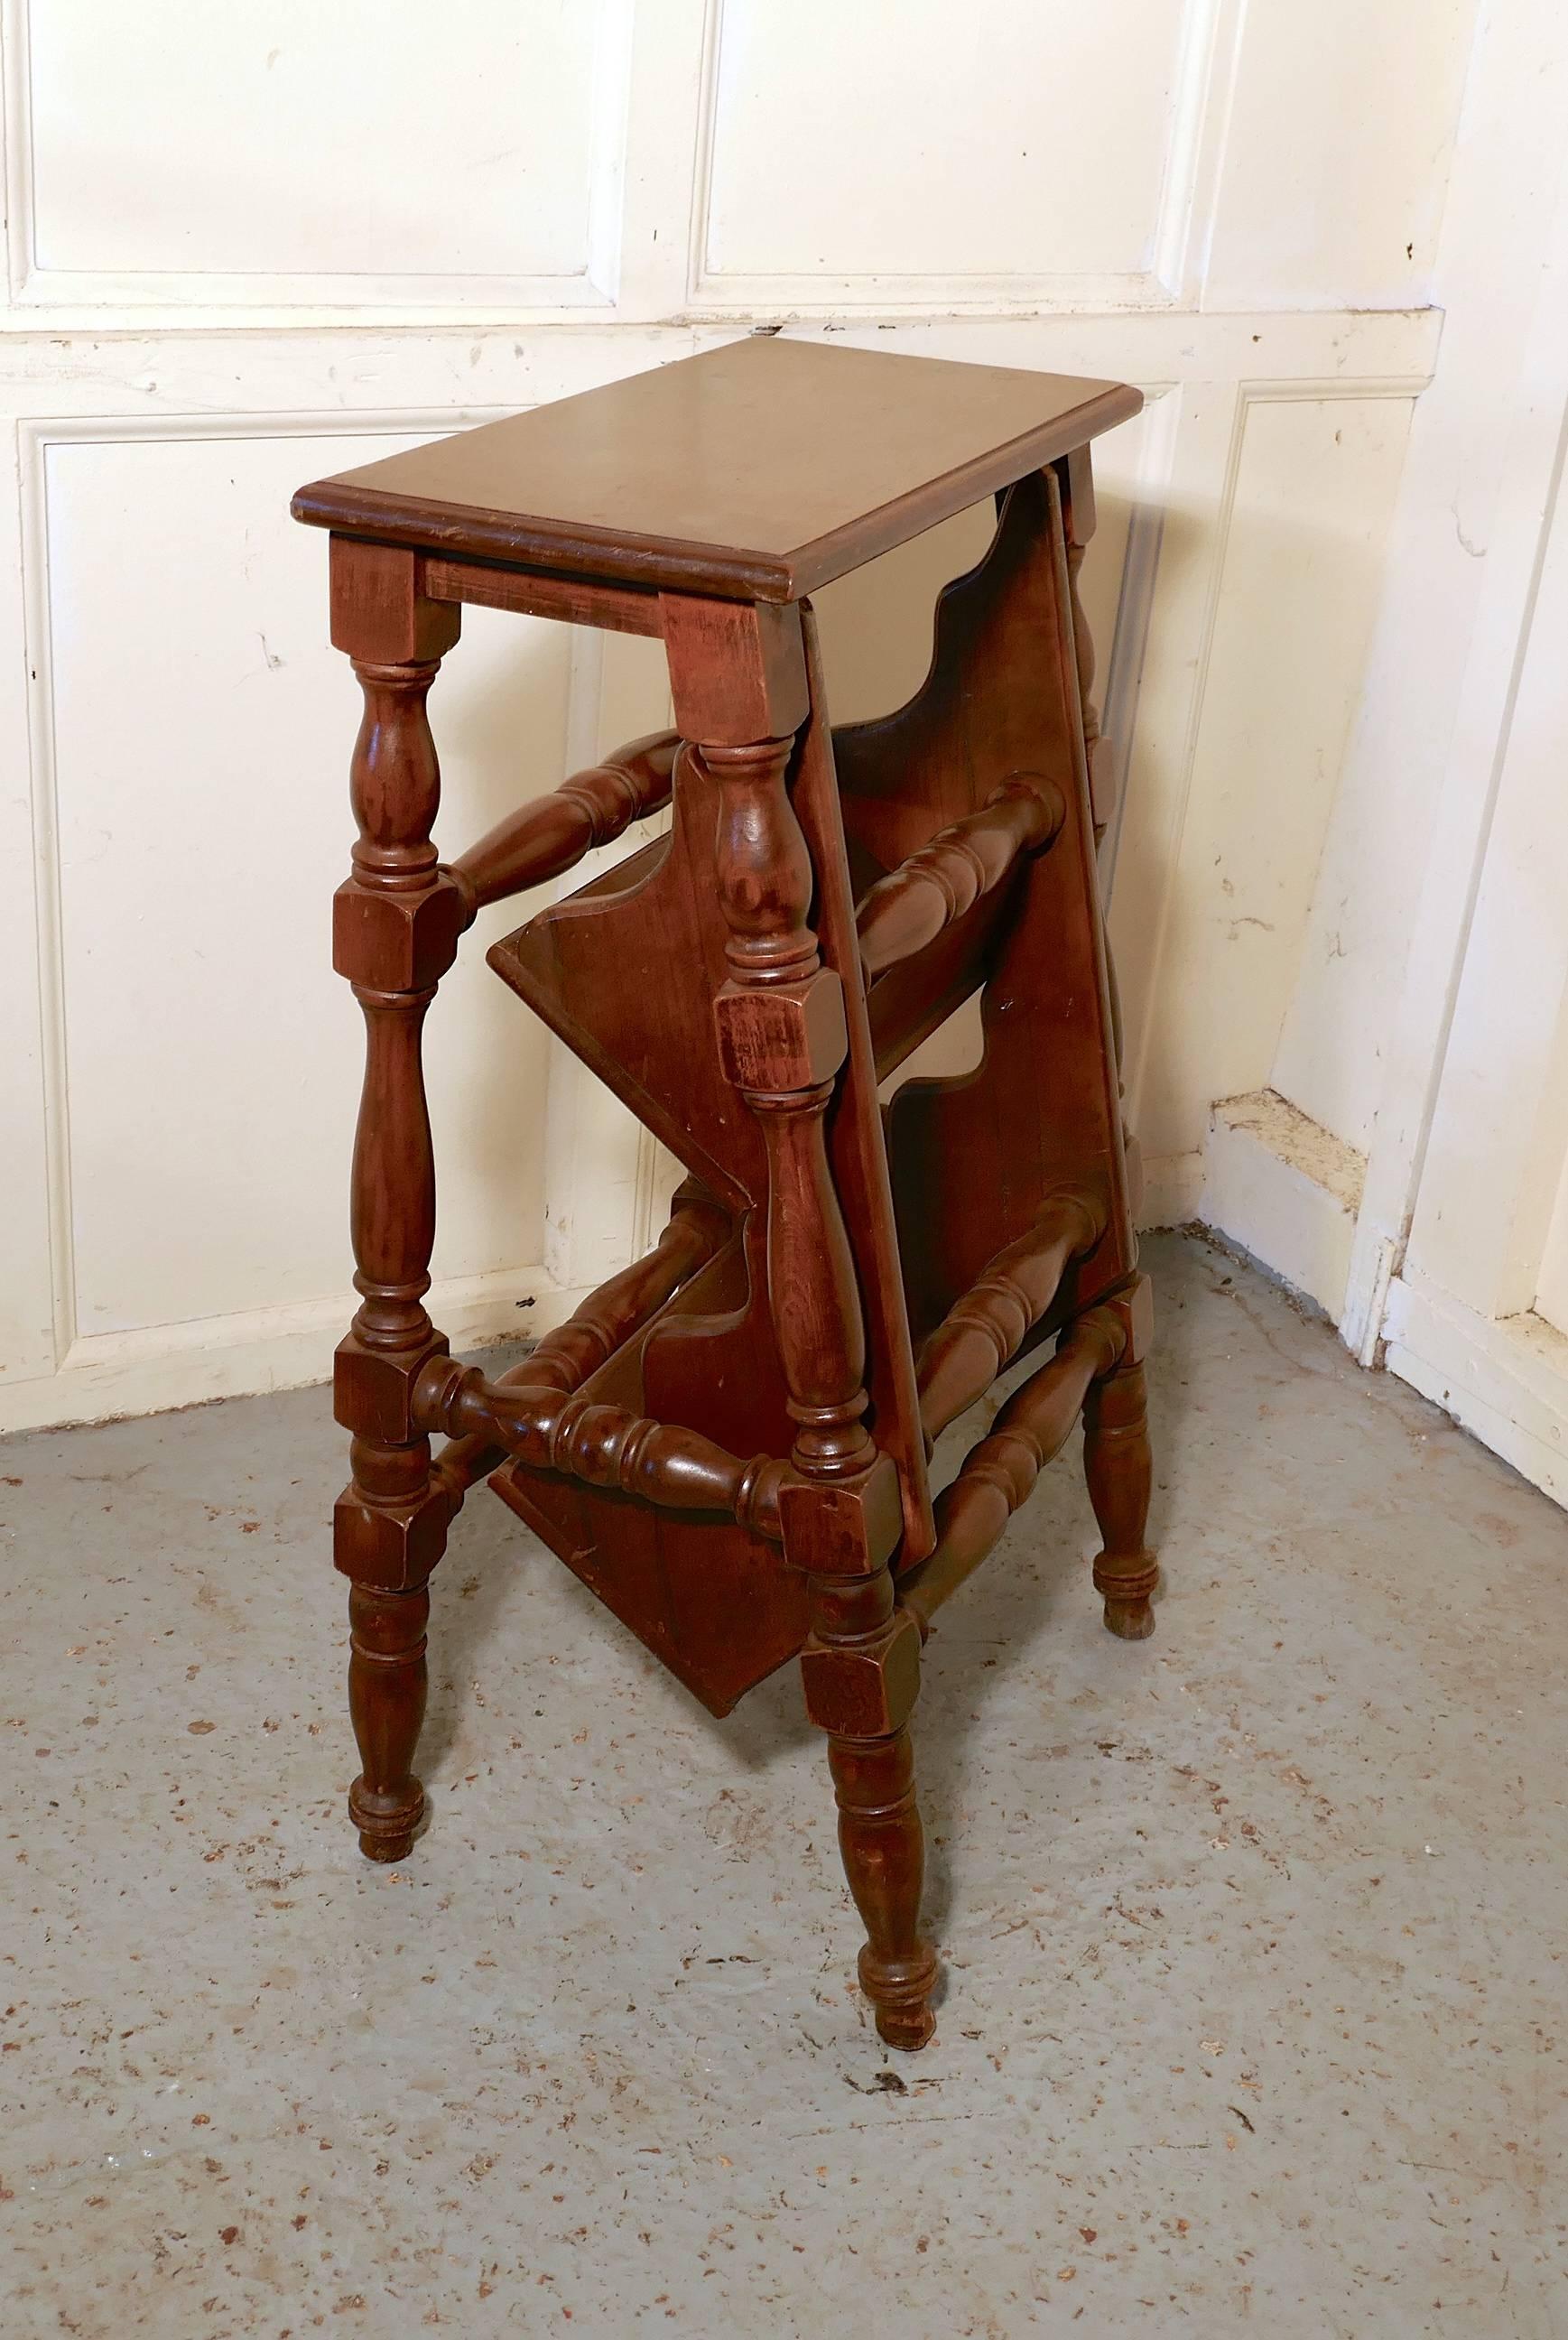 Metamorphic kitchen or library step stool

A very useful piece, this handy little stool can be flipped over and turned into a small three step ladder, originally this type of stool was used in a Library hence the name, but it would work just as